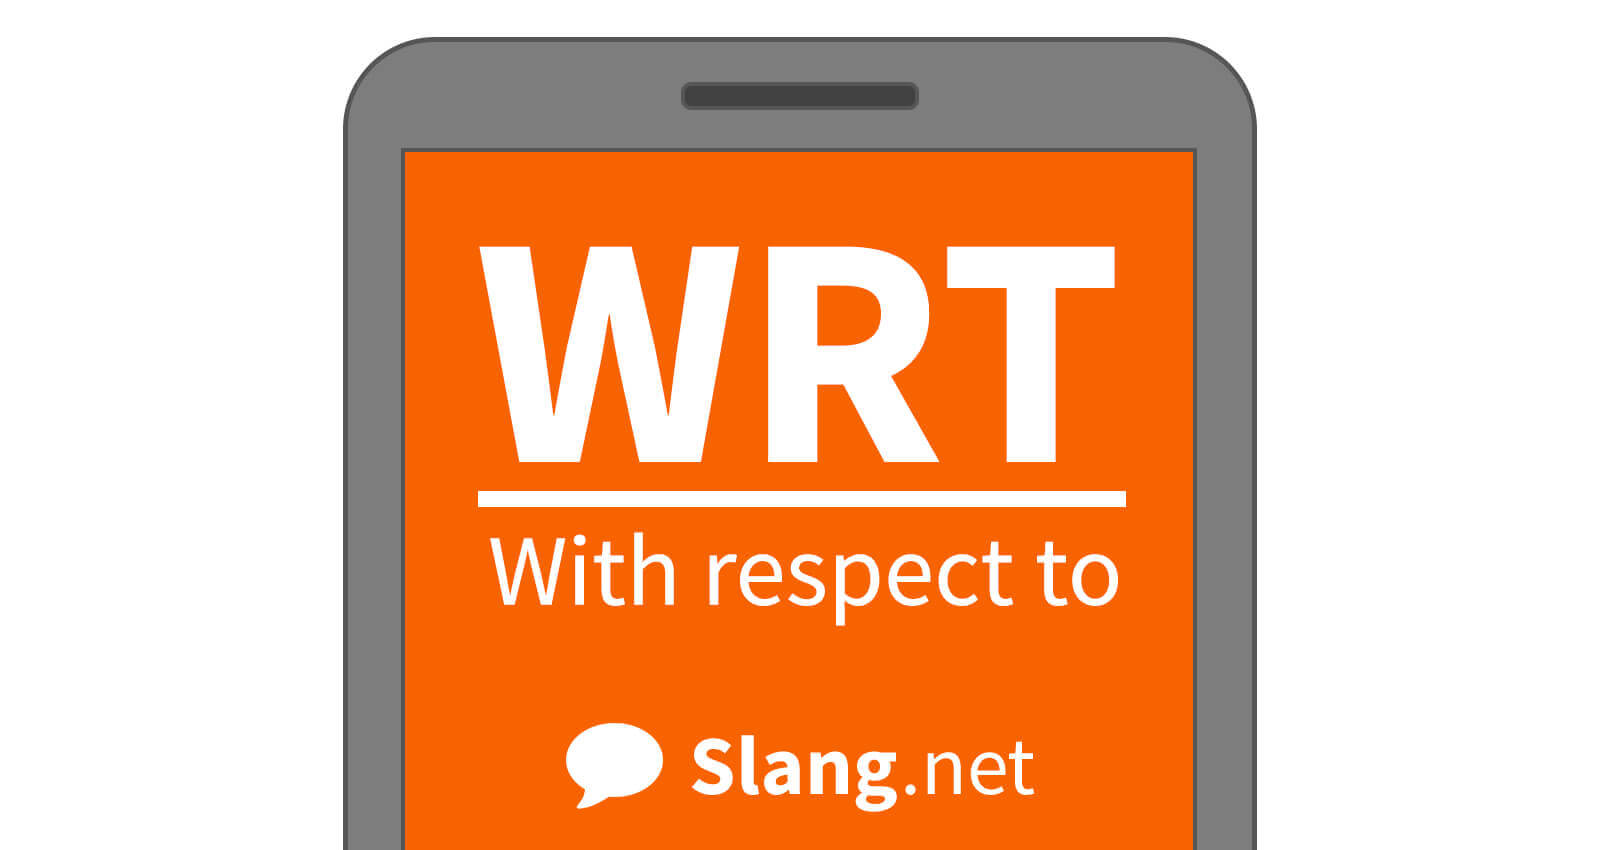 You may see WRT in messages and online